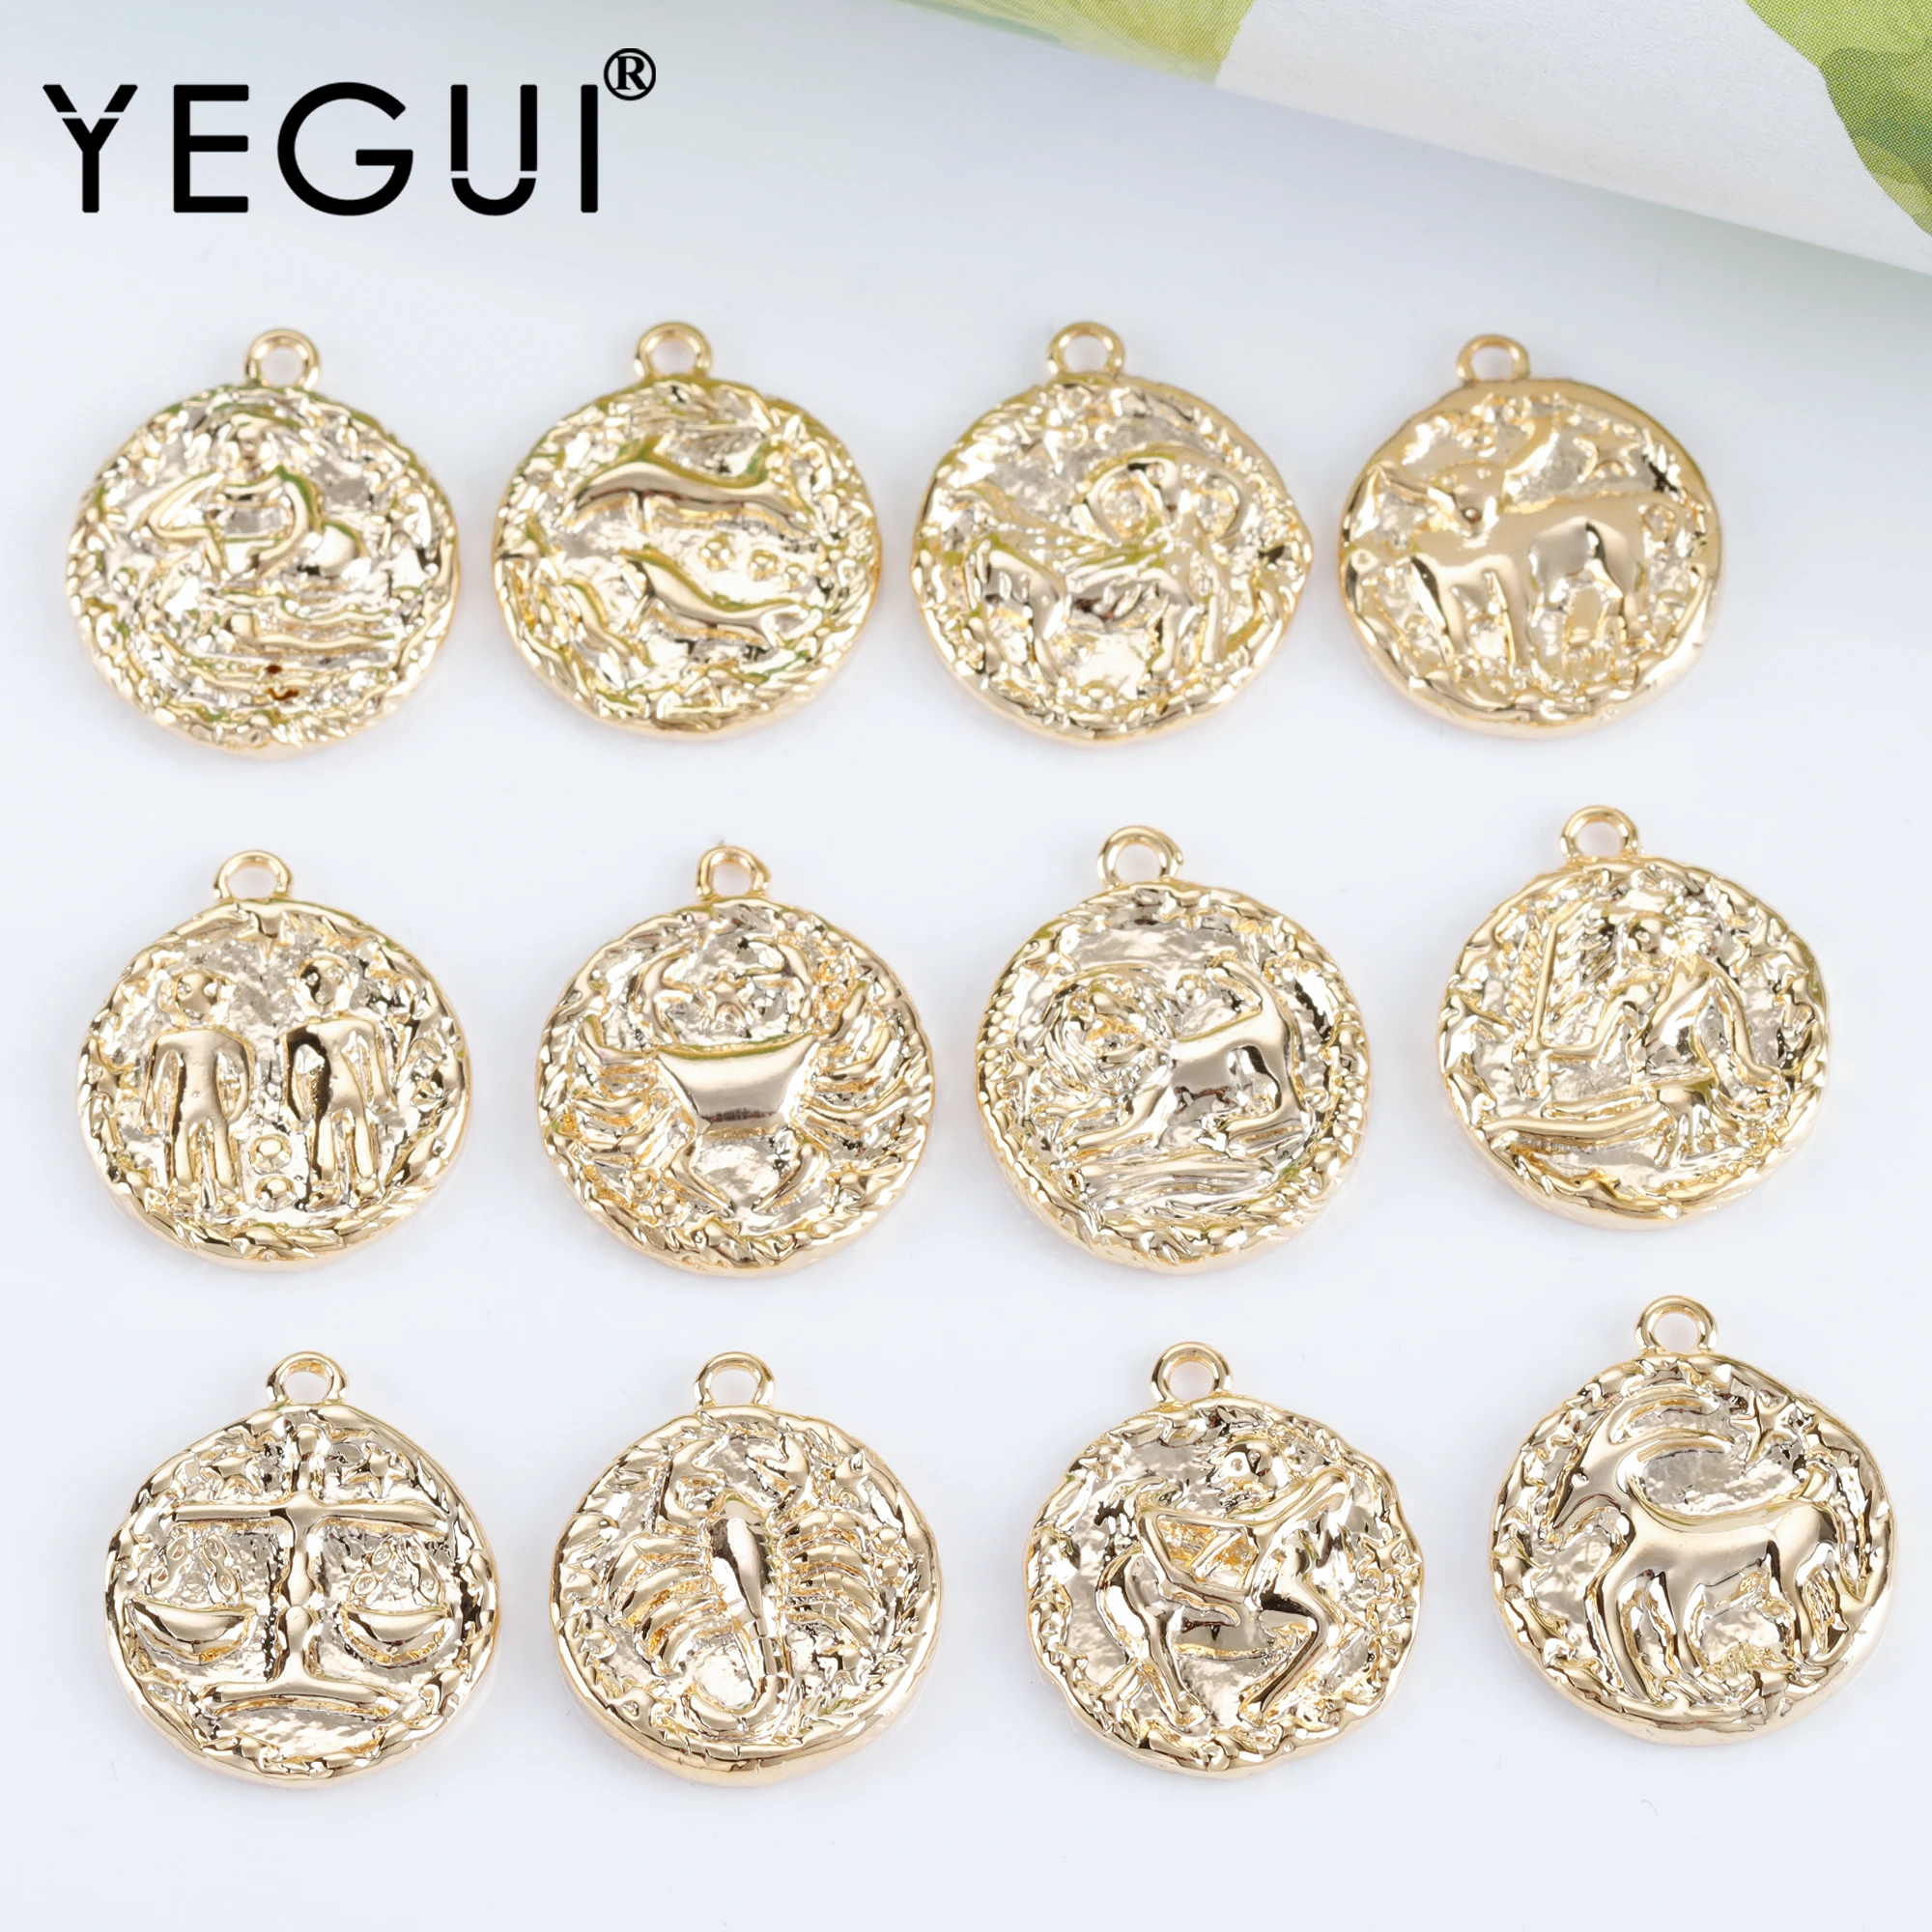 

YEGUI MA23,jewelry accessories,pass REACH,nickel free,18k gold plated,copper,diy constellation pendant,jewelry makeing,10pcs/lot